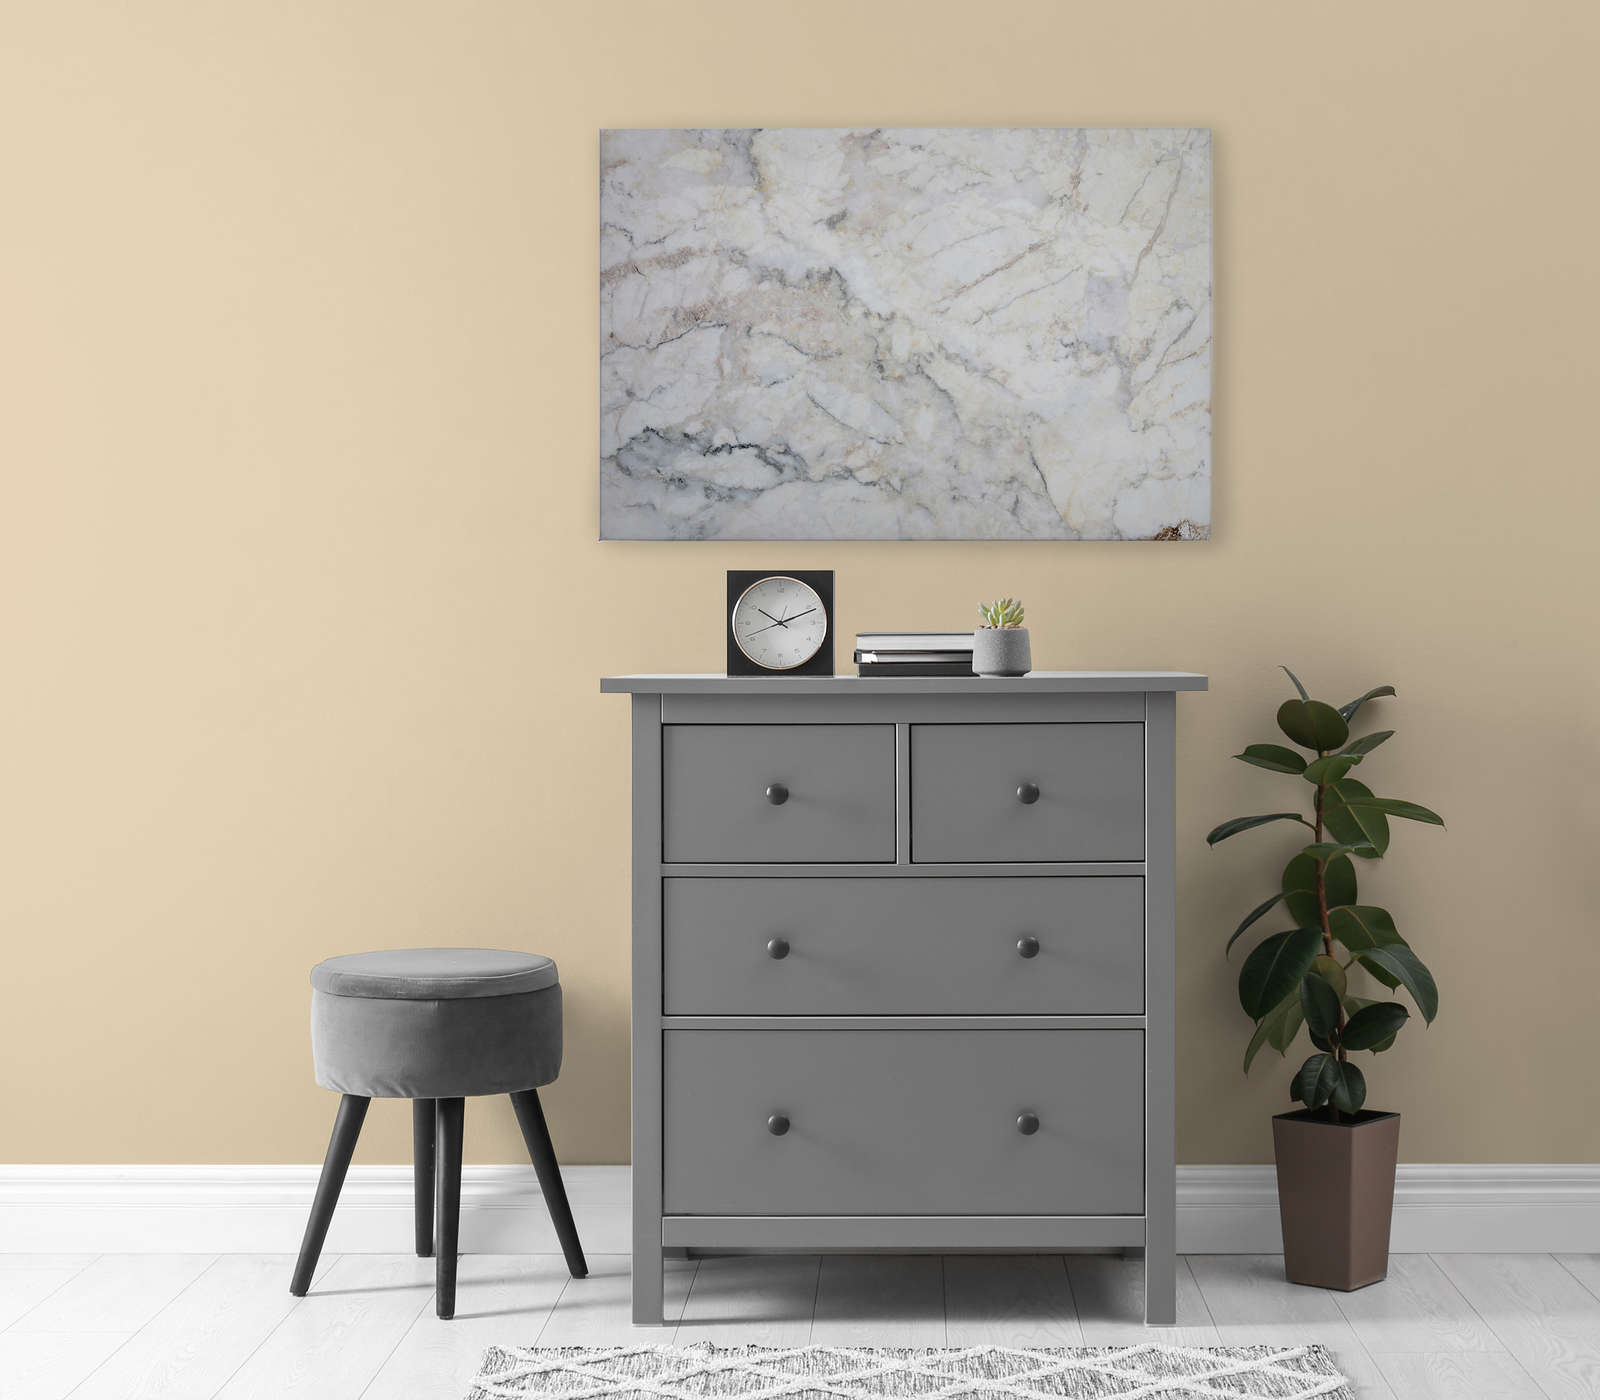             Canvas painting realistic & large marble - 0,90 m x 0,60 m
        